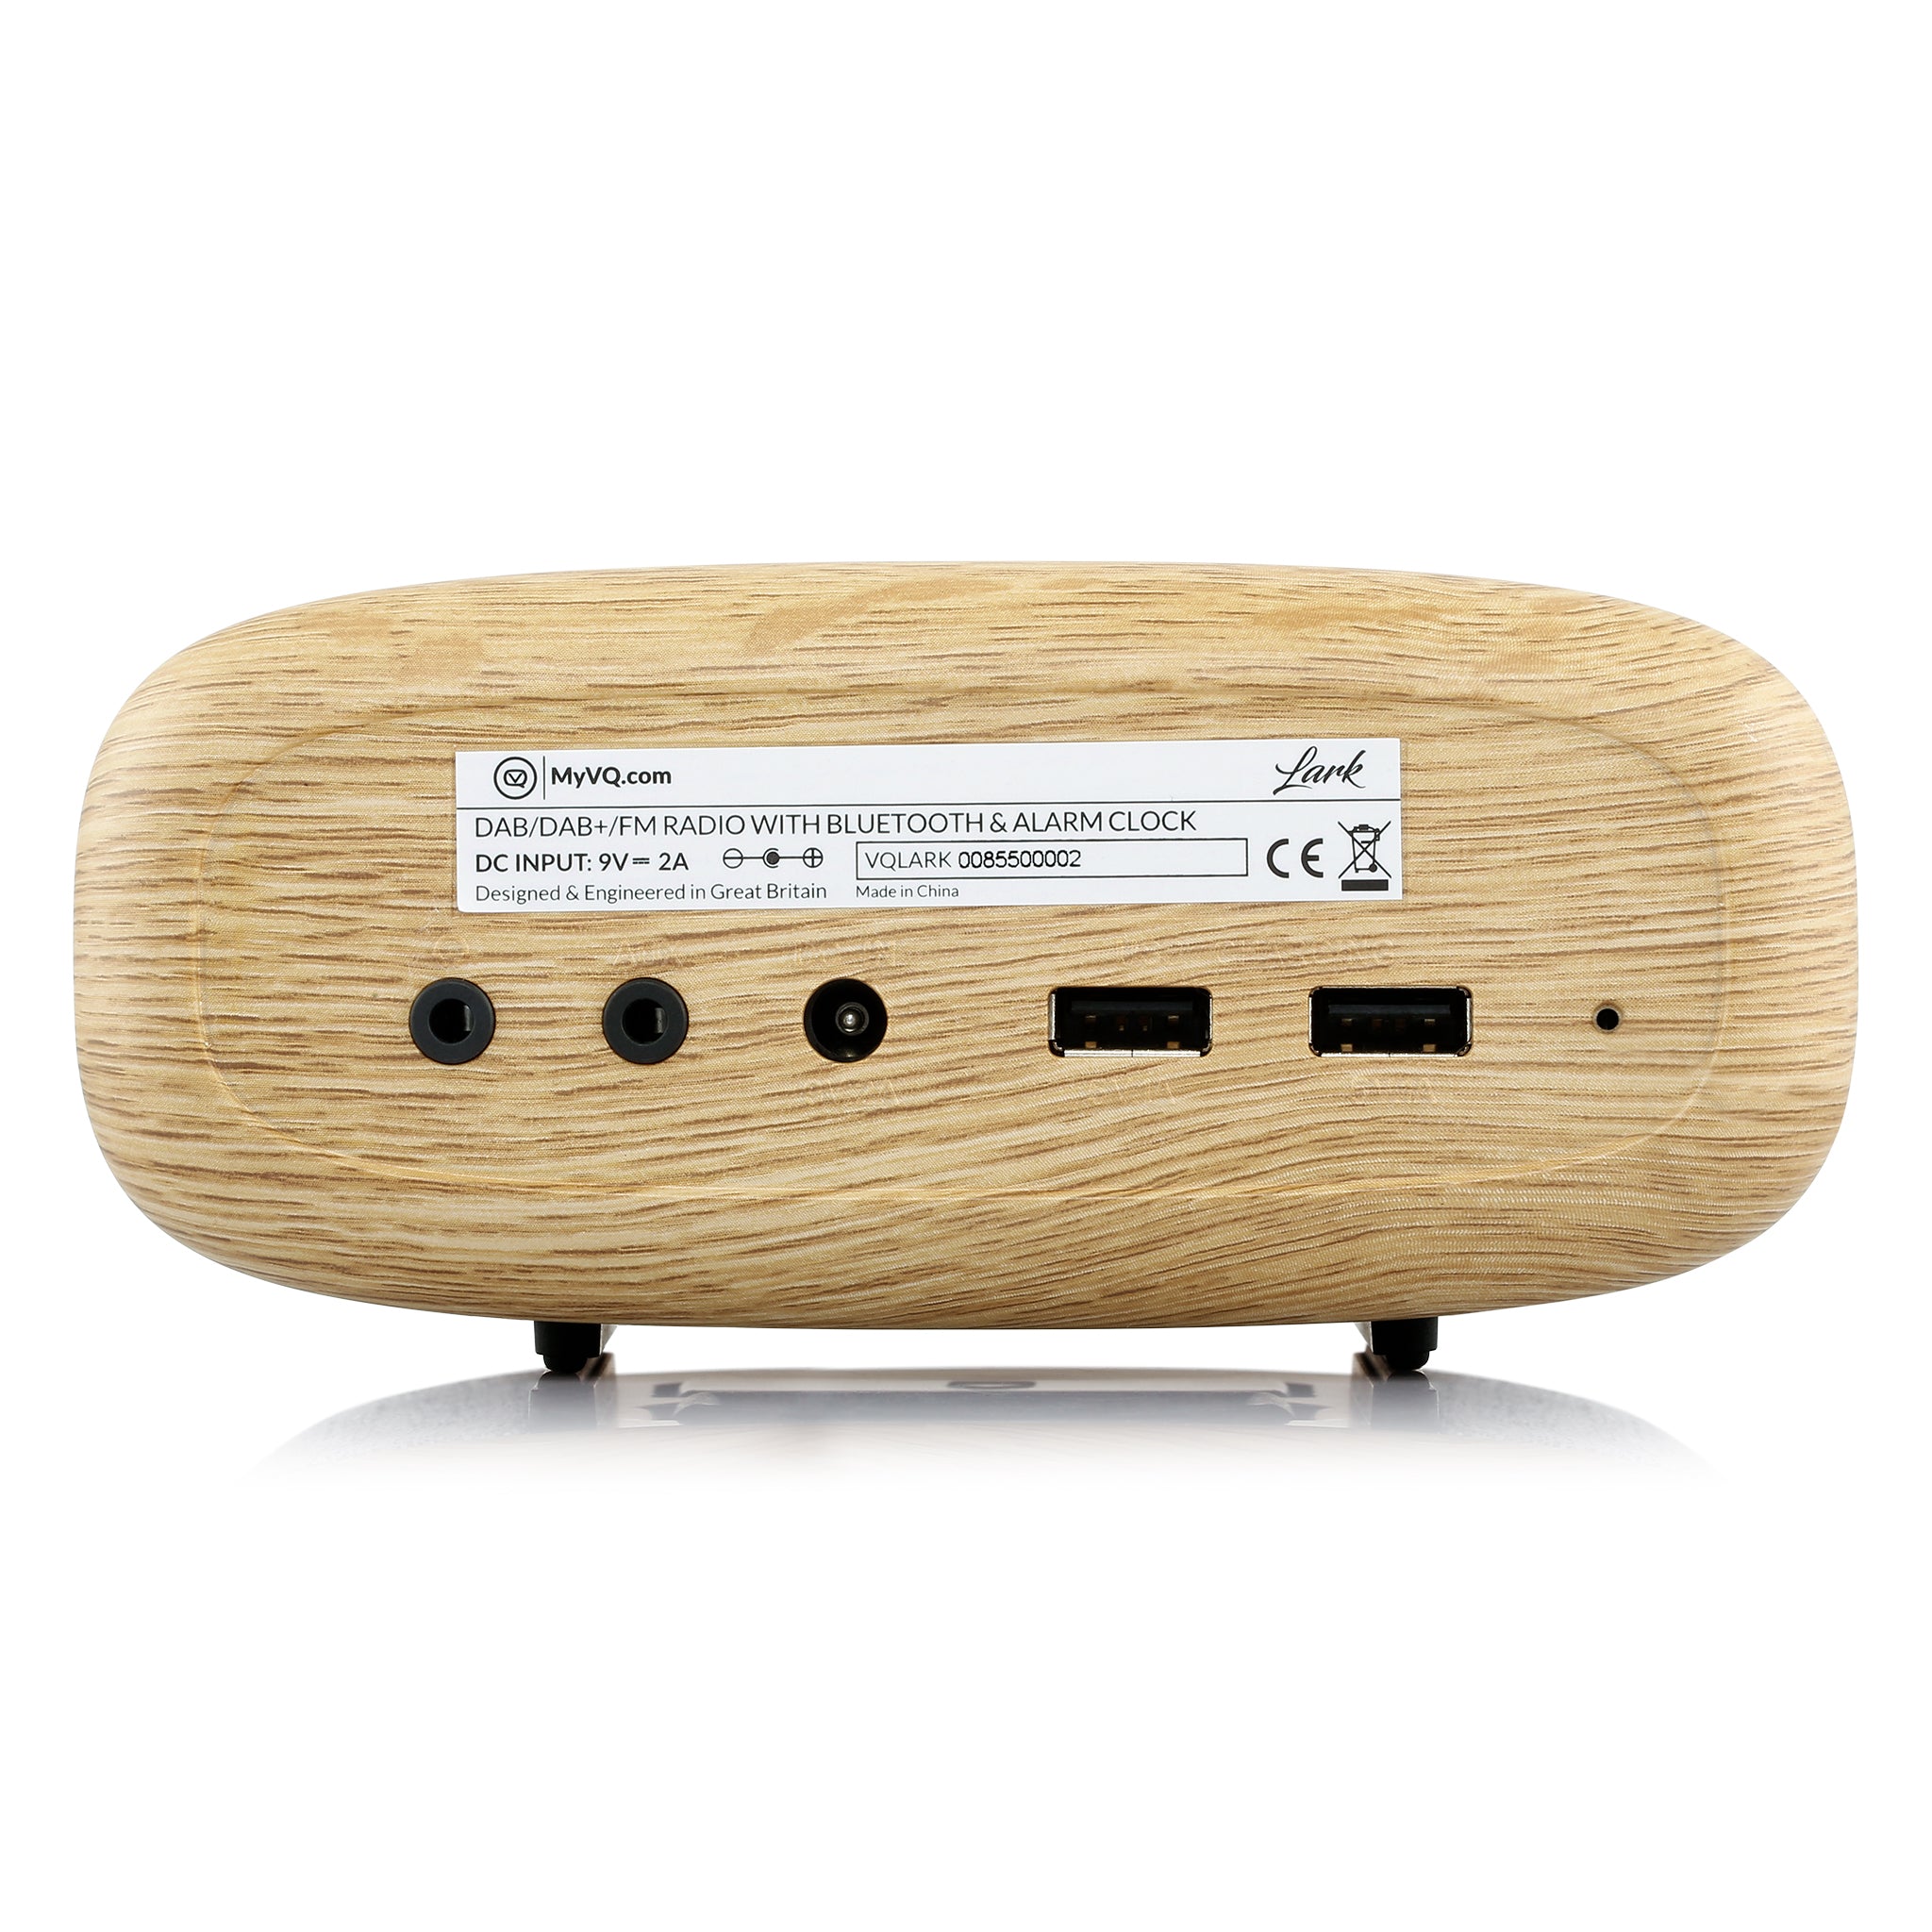 The MYVQ Lark is simply a beautiful bedside alarm clock radio. Making mornings a little more enjoyable with DAB / DAB+ Digital & FM Radio and also Bluetooth speaker.